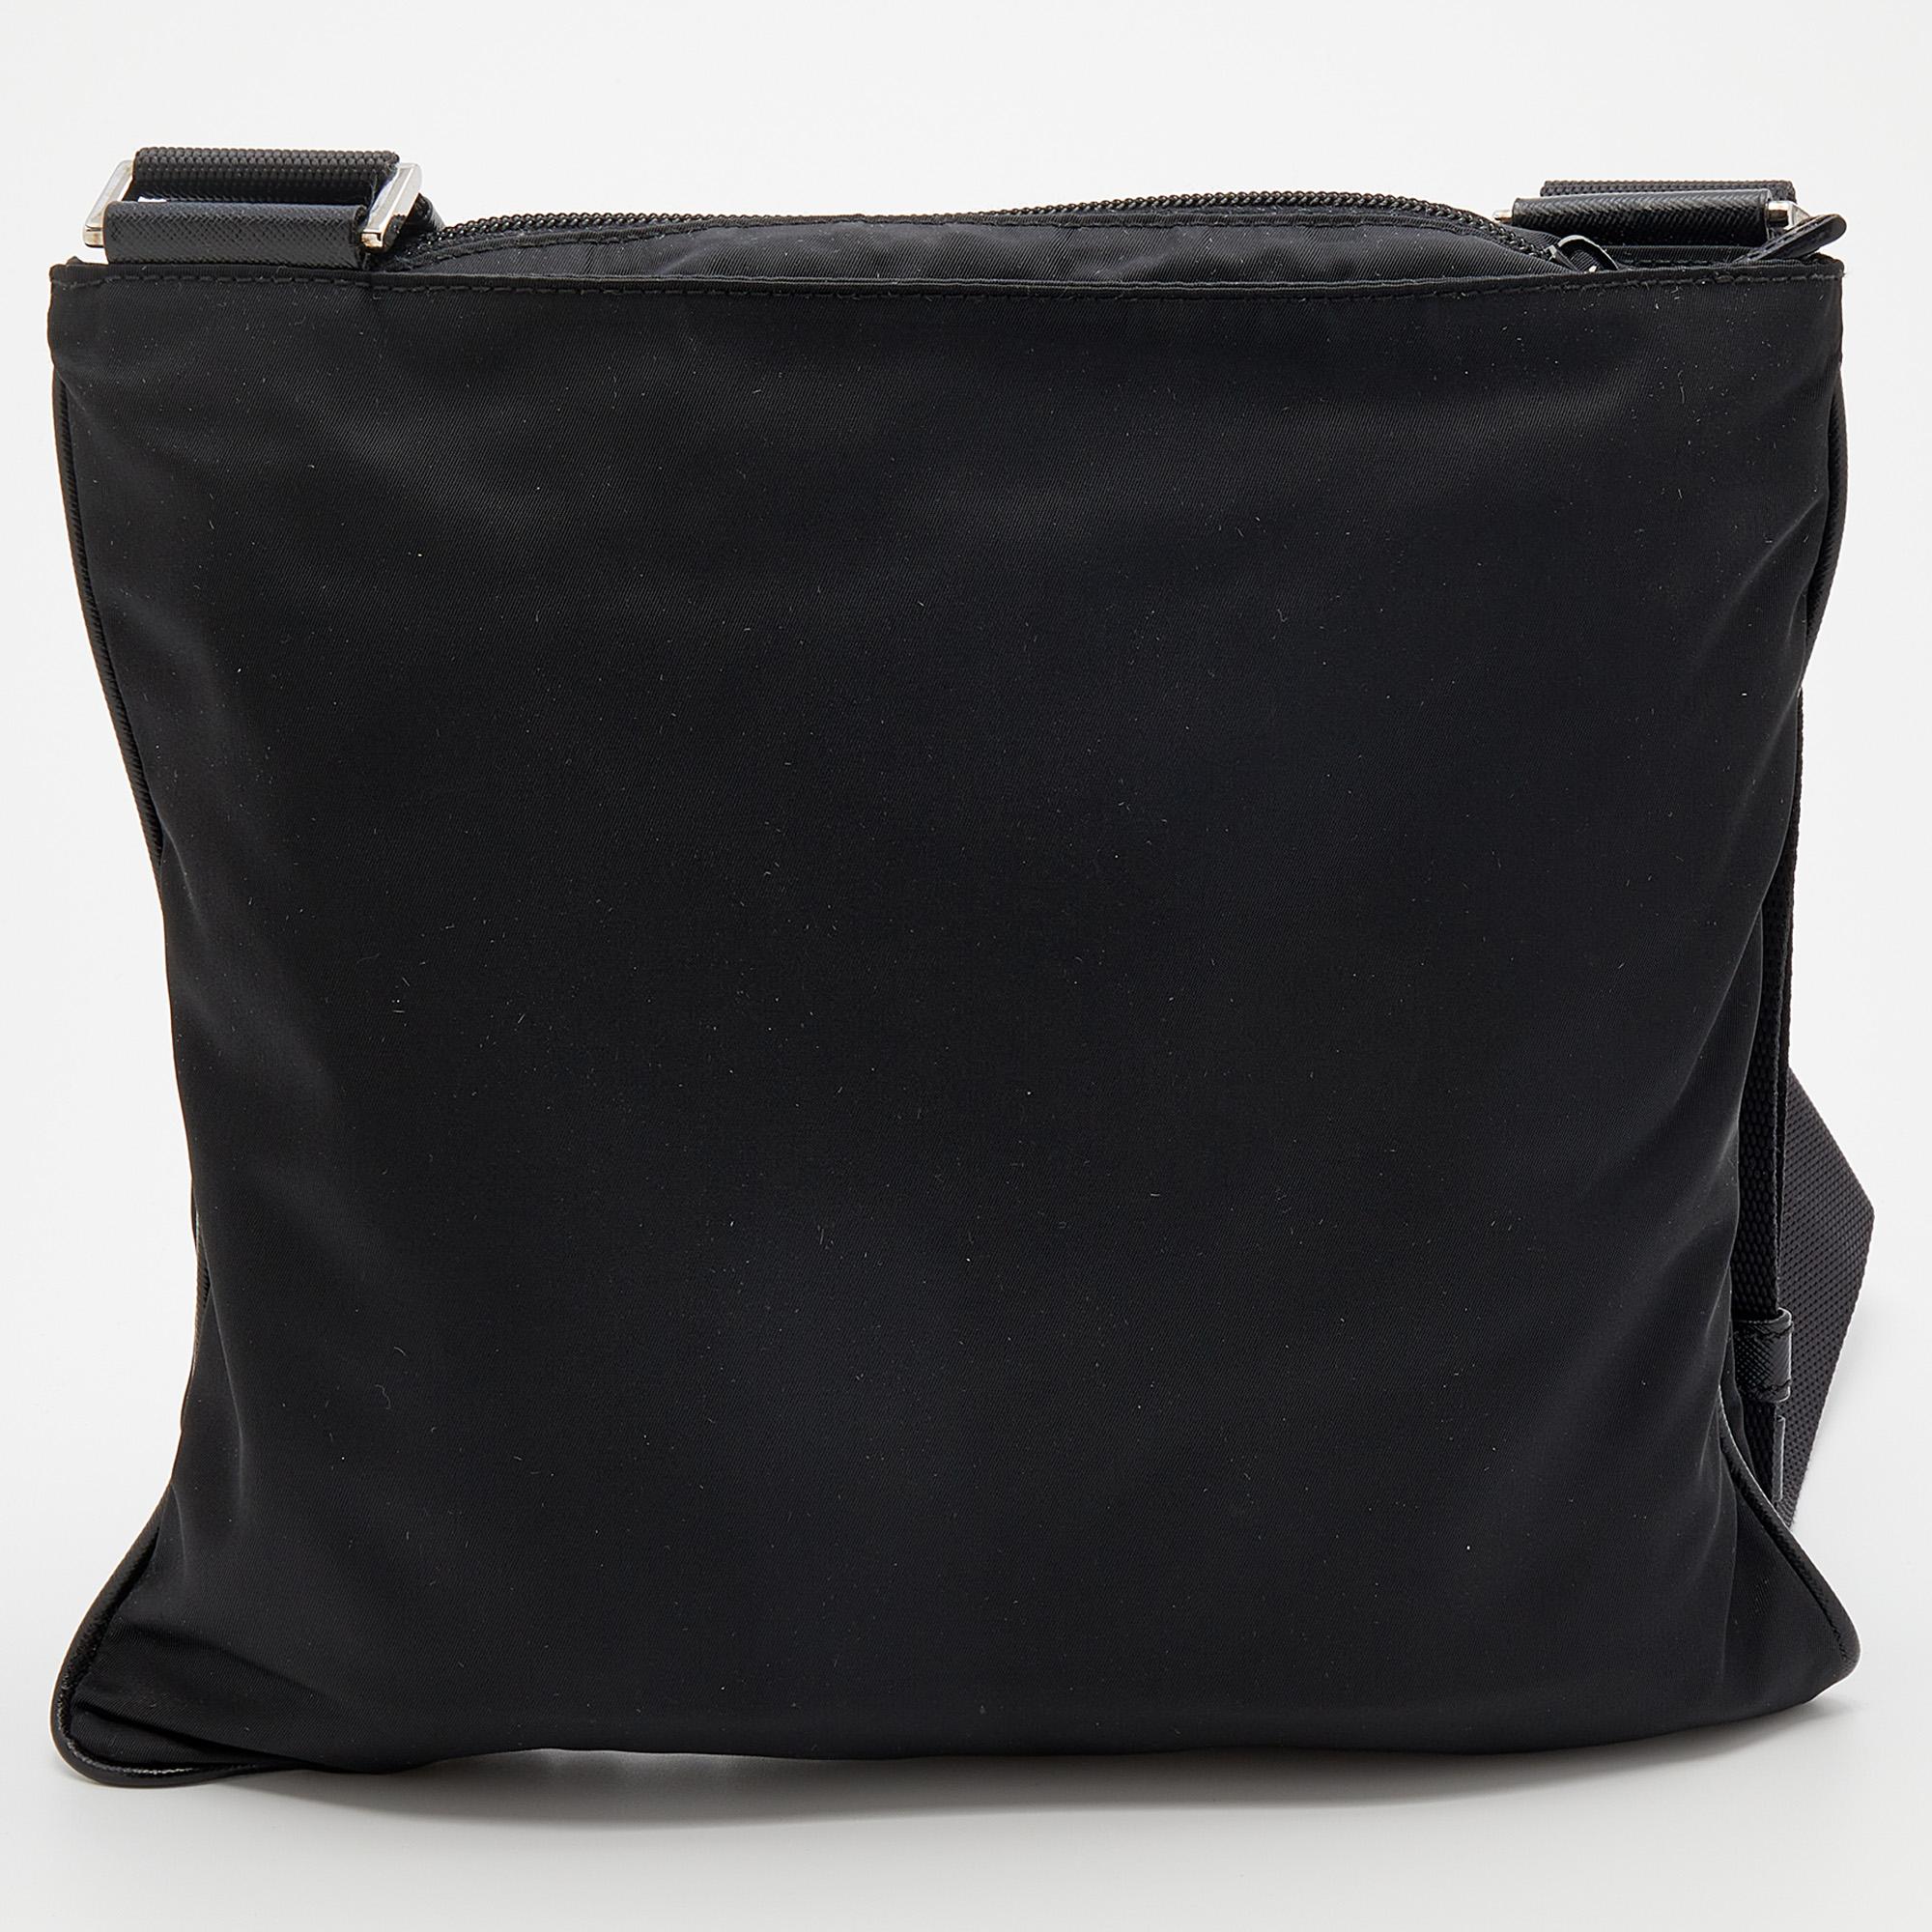 This easy-to-carry Prada messenger bag can be paraded from workday to the weekend. It has a smart and practical design. The bag is crafted using black nylon, embellished with the triangular Prada logo, and held by an adjustable shoulder